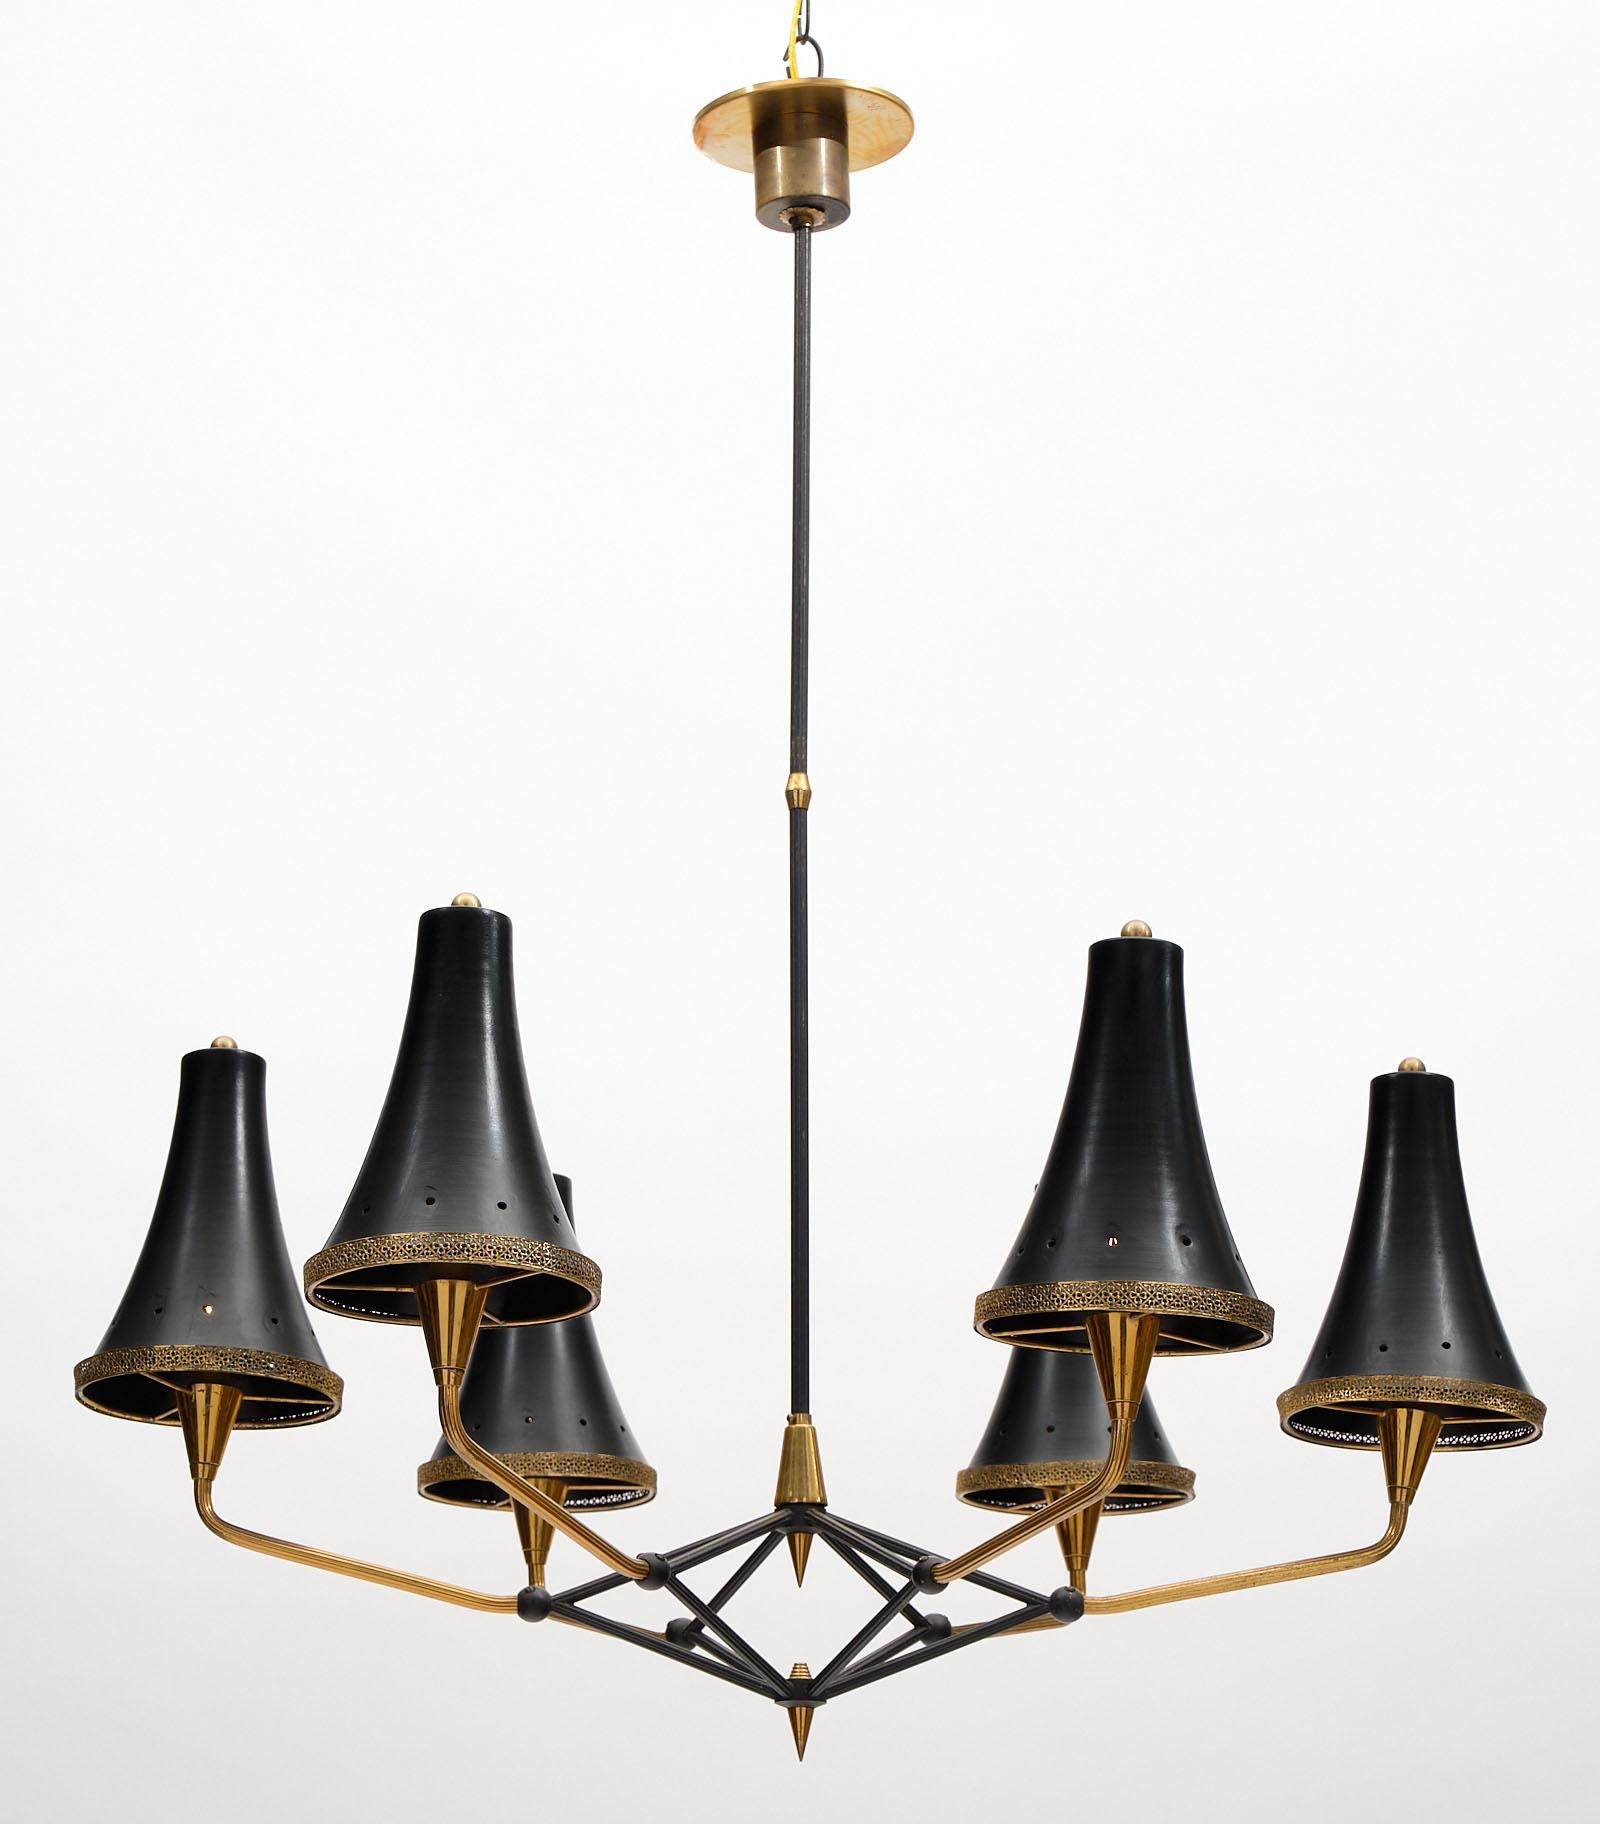 Italian vintage mid-century chandelier with lacquered steel structure and brass elements. The shades are black lacquered “tole” cones for added architectural interest. This piece has been newly wired for US standards.